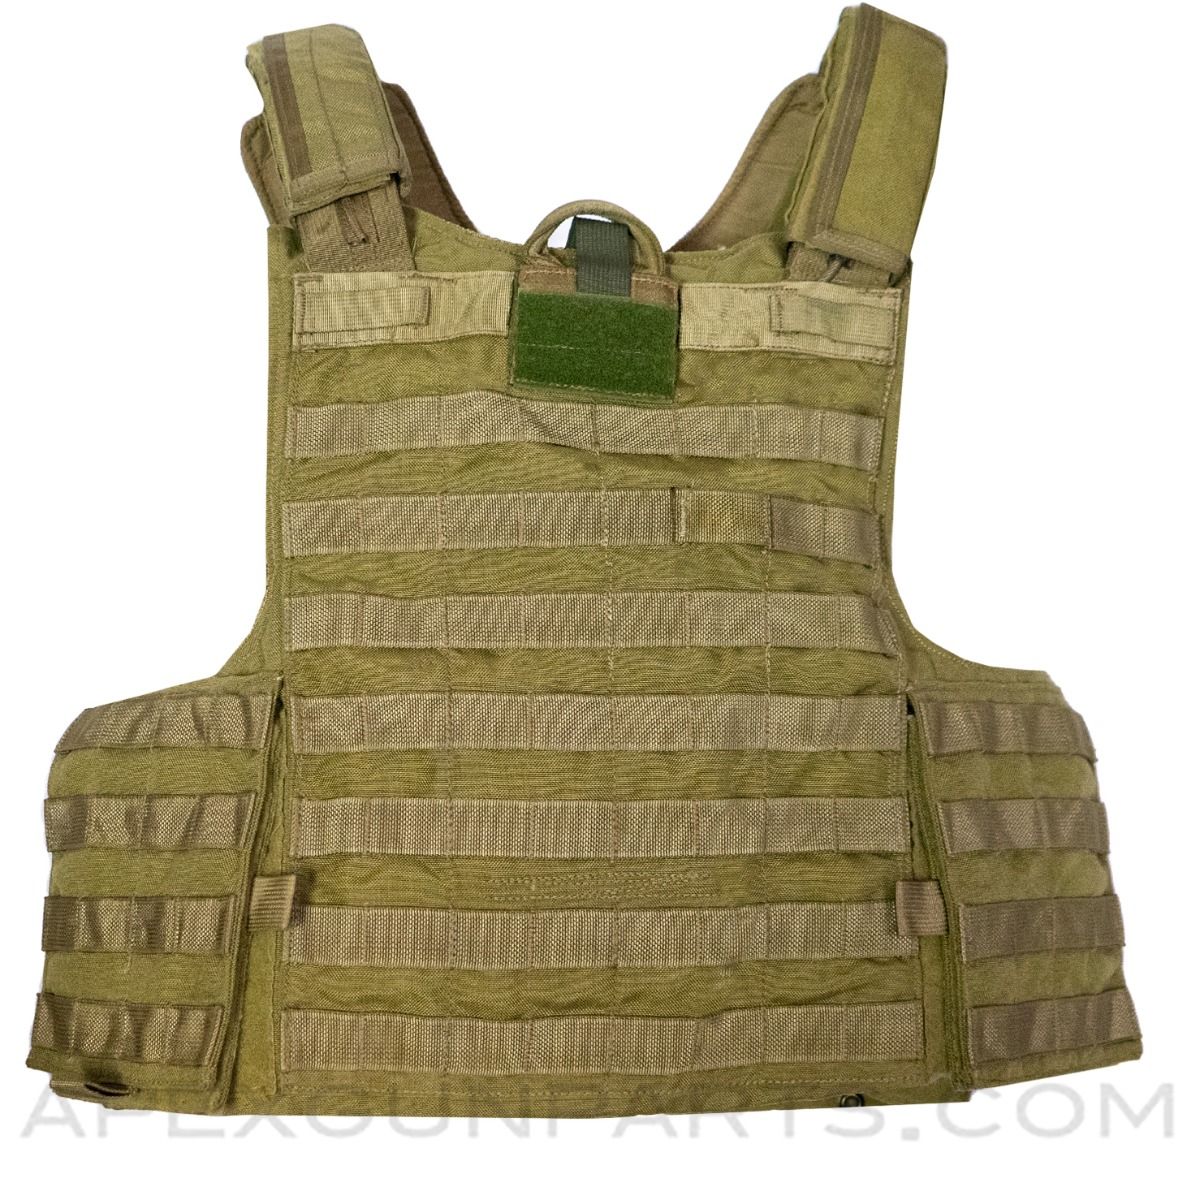 CIRAS Plate Carrier Set, Coyote - Large